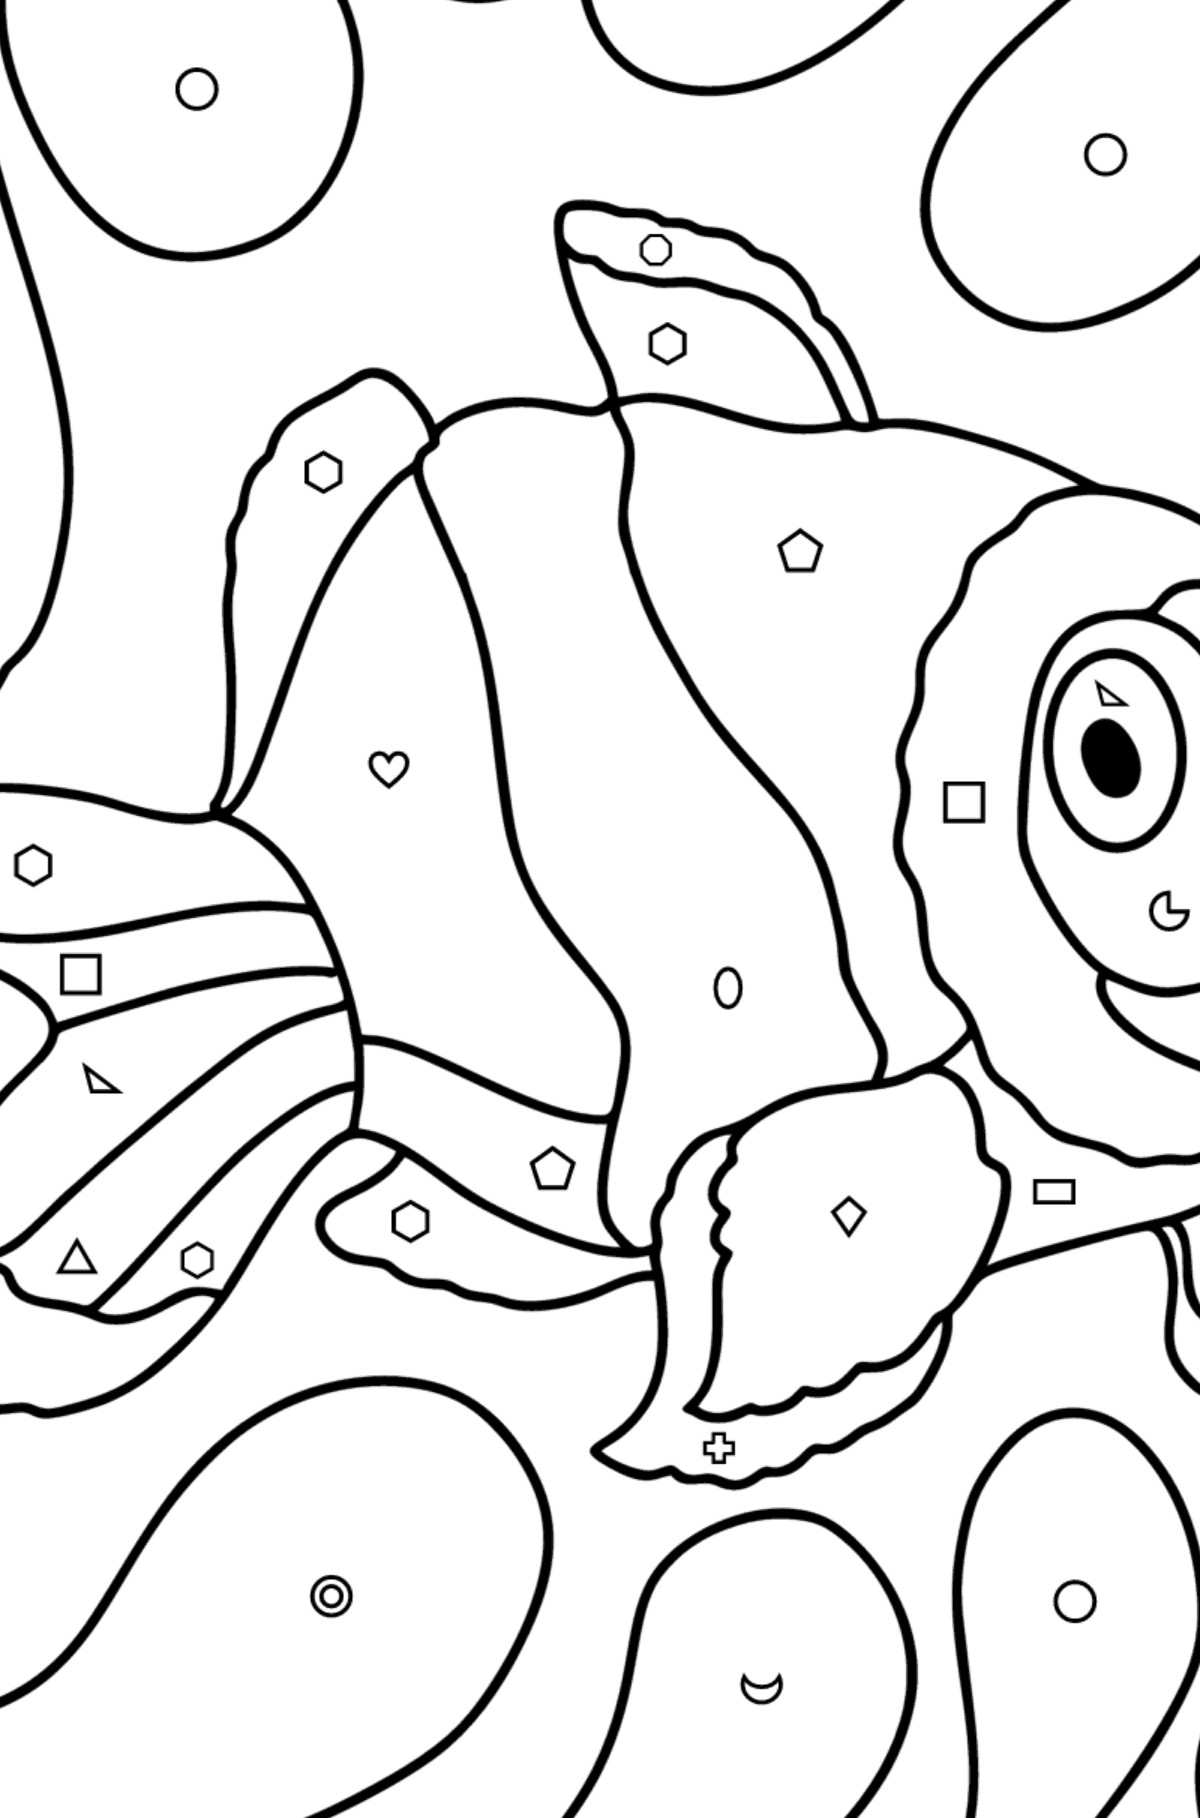 Clown fish coloring page - Coloring by Geometric Shapes for Kids